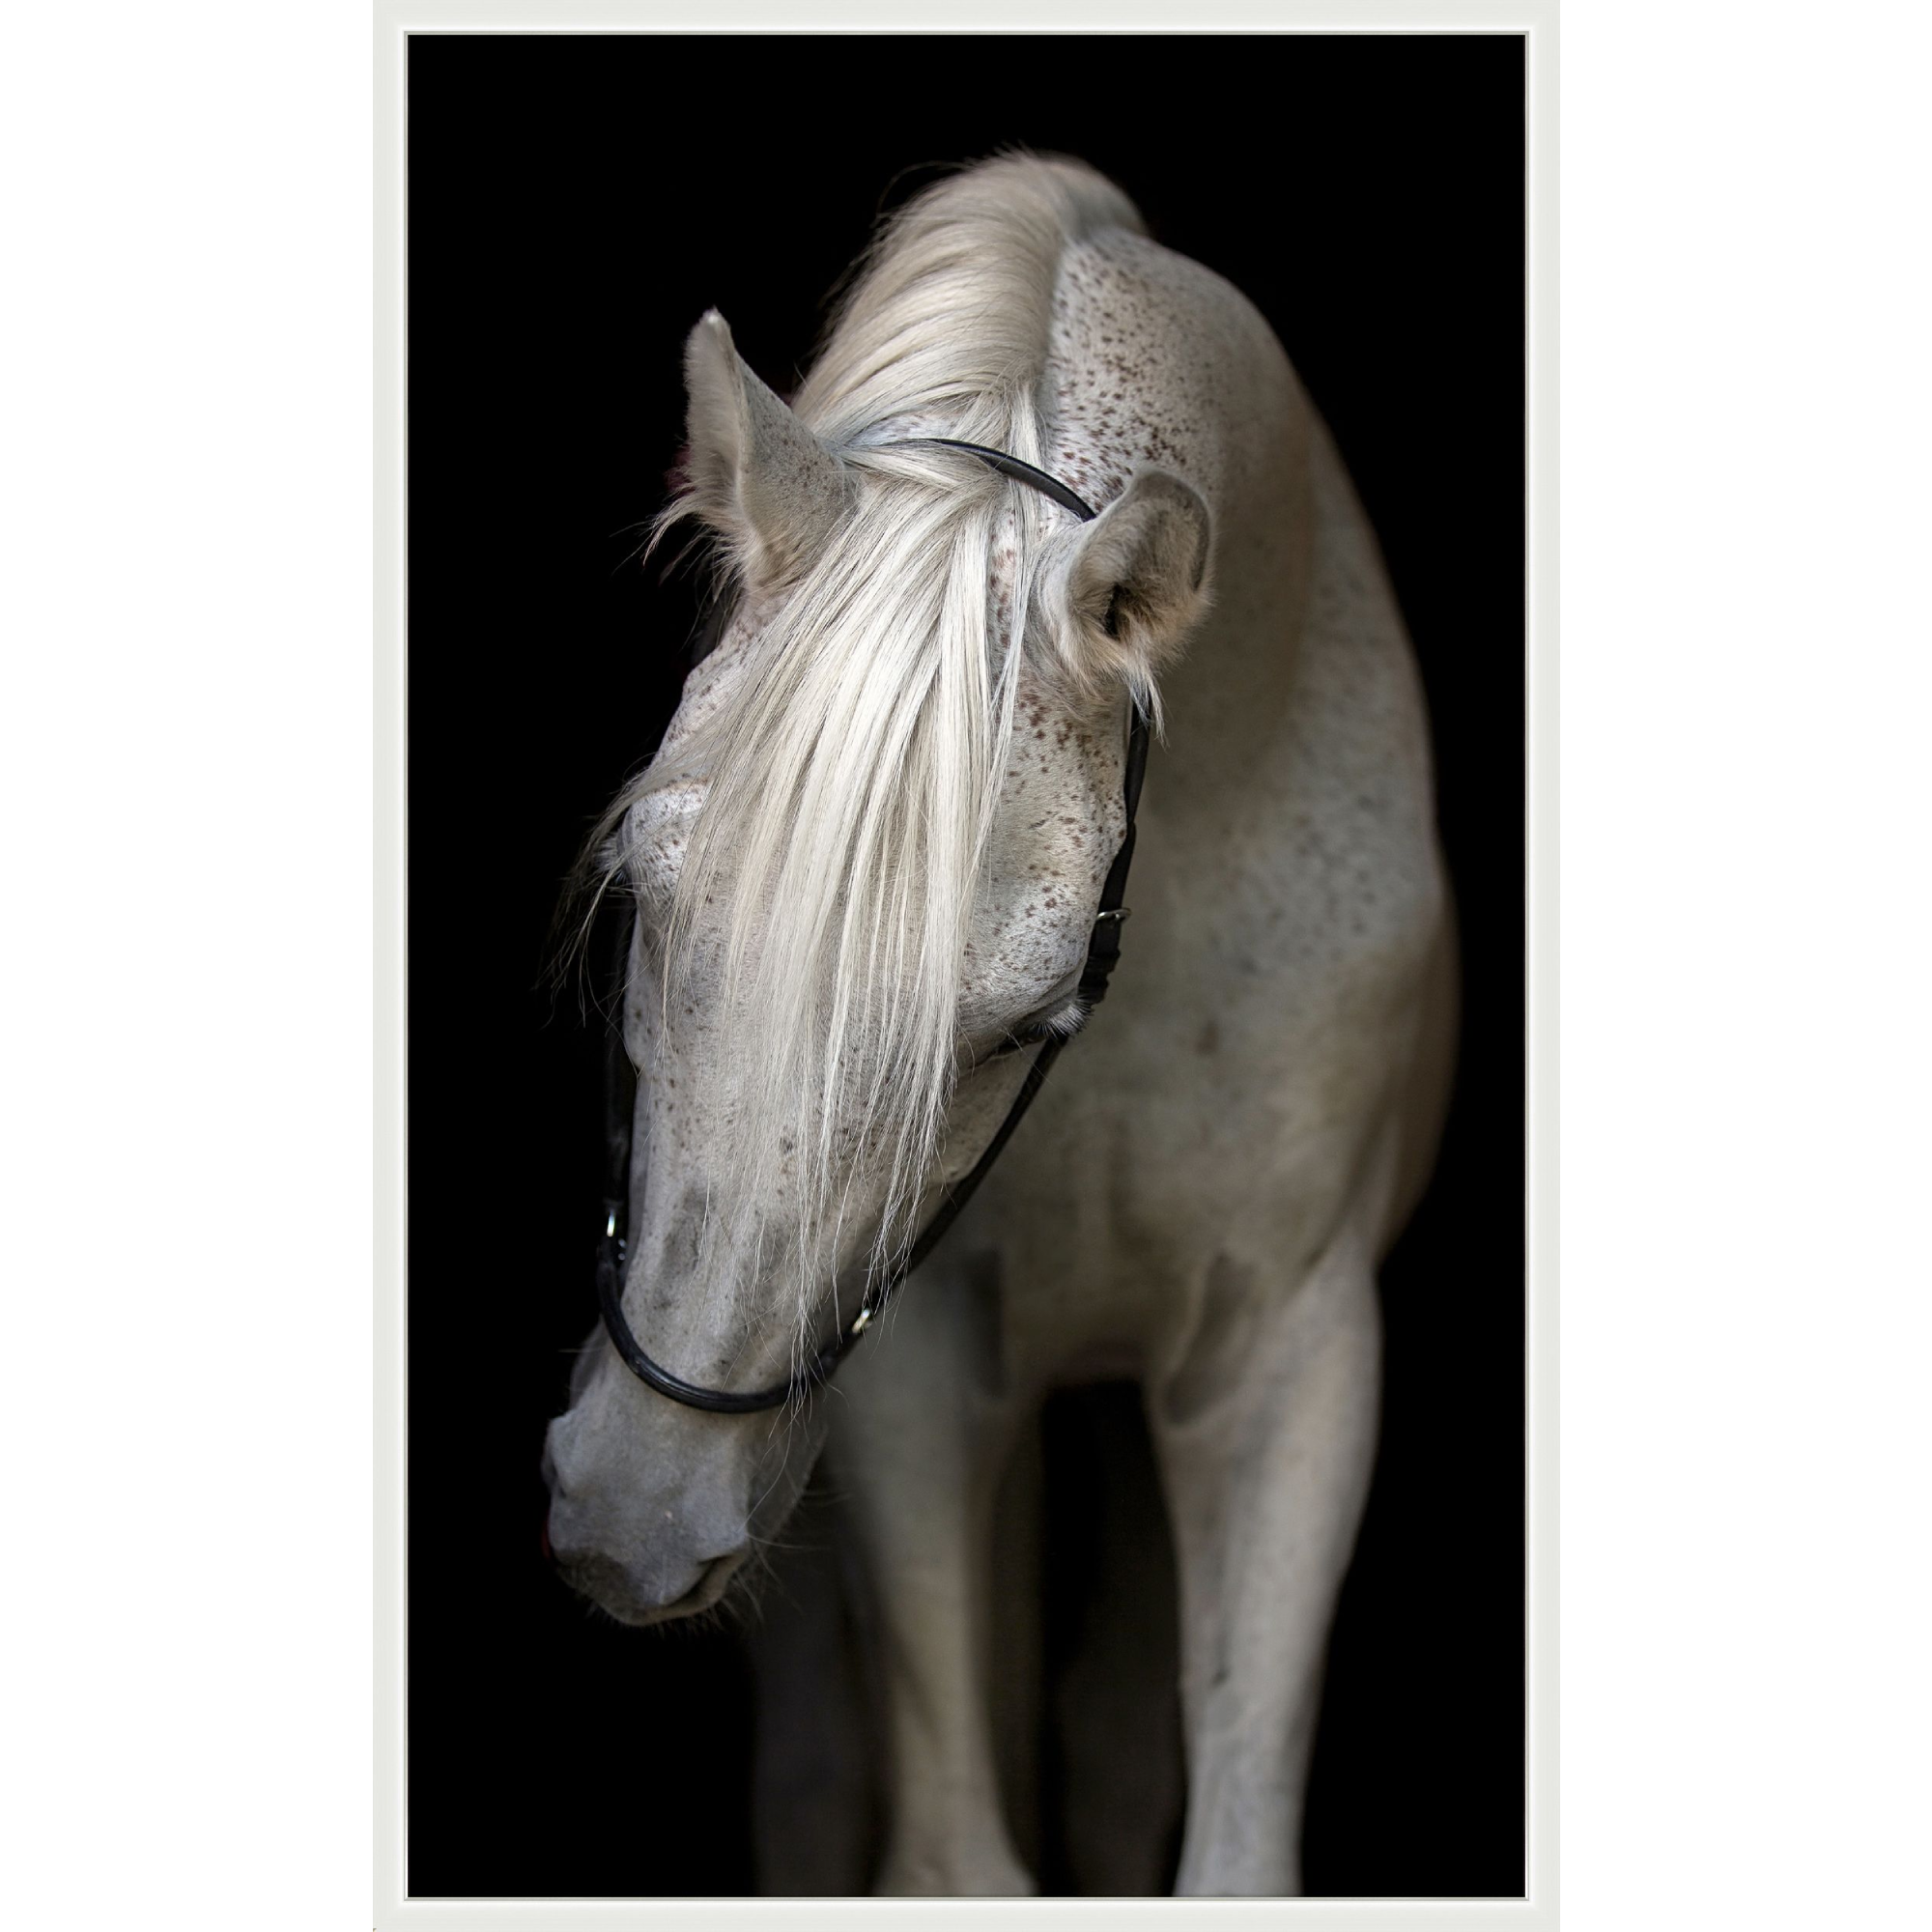 The Pasha art piece is a chic addition to your space. This view of horse art gives a brings a sense of peace and comfort to any room. Amethyst Home provides interior design services, furniture, rugs, and lighting in the Kansas City metro area.